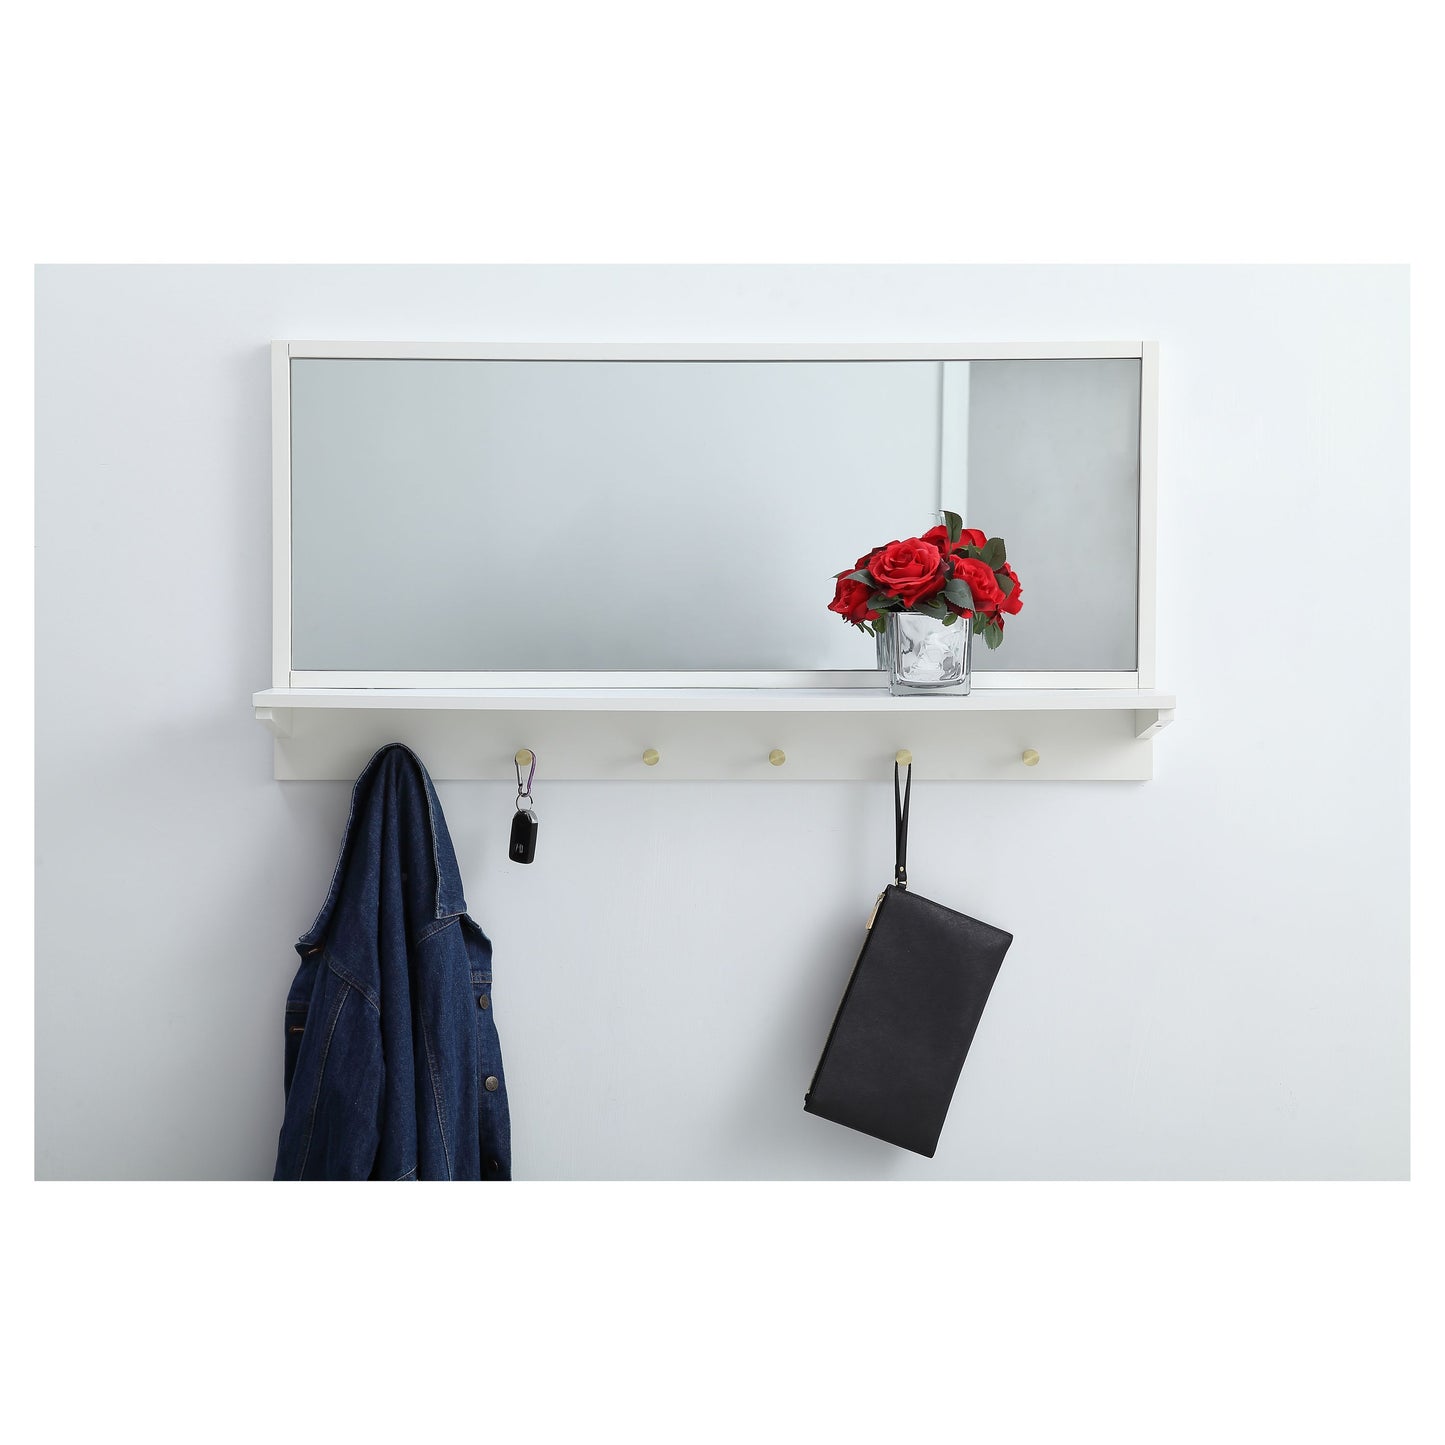 MR504221WH Elle 42" x 21" Entryway Mirror with Brass Hooks in White